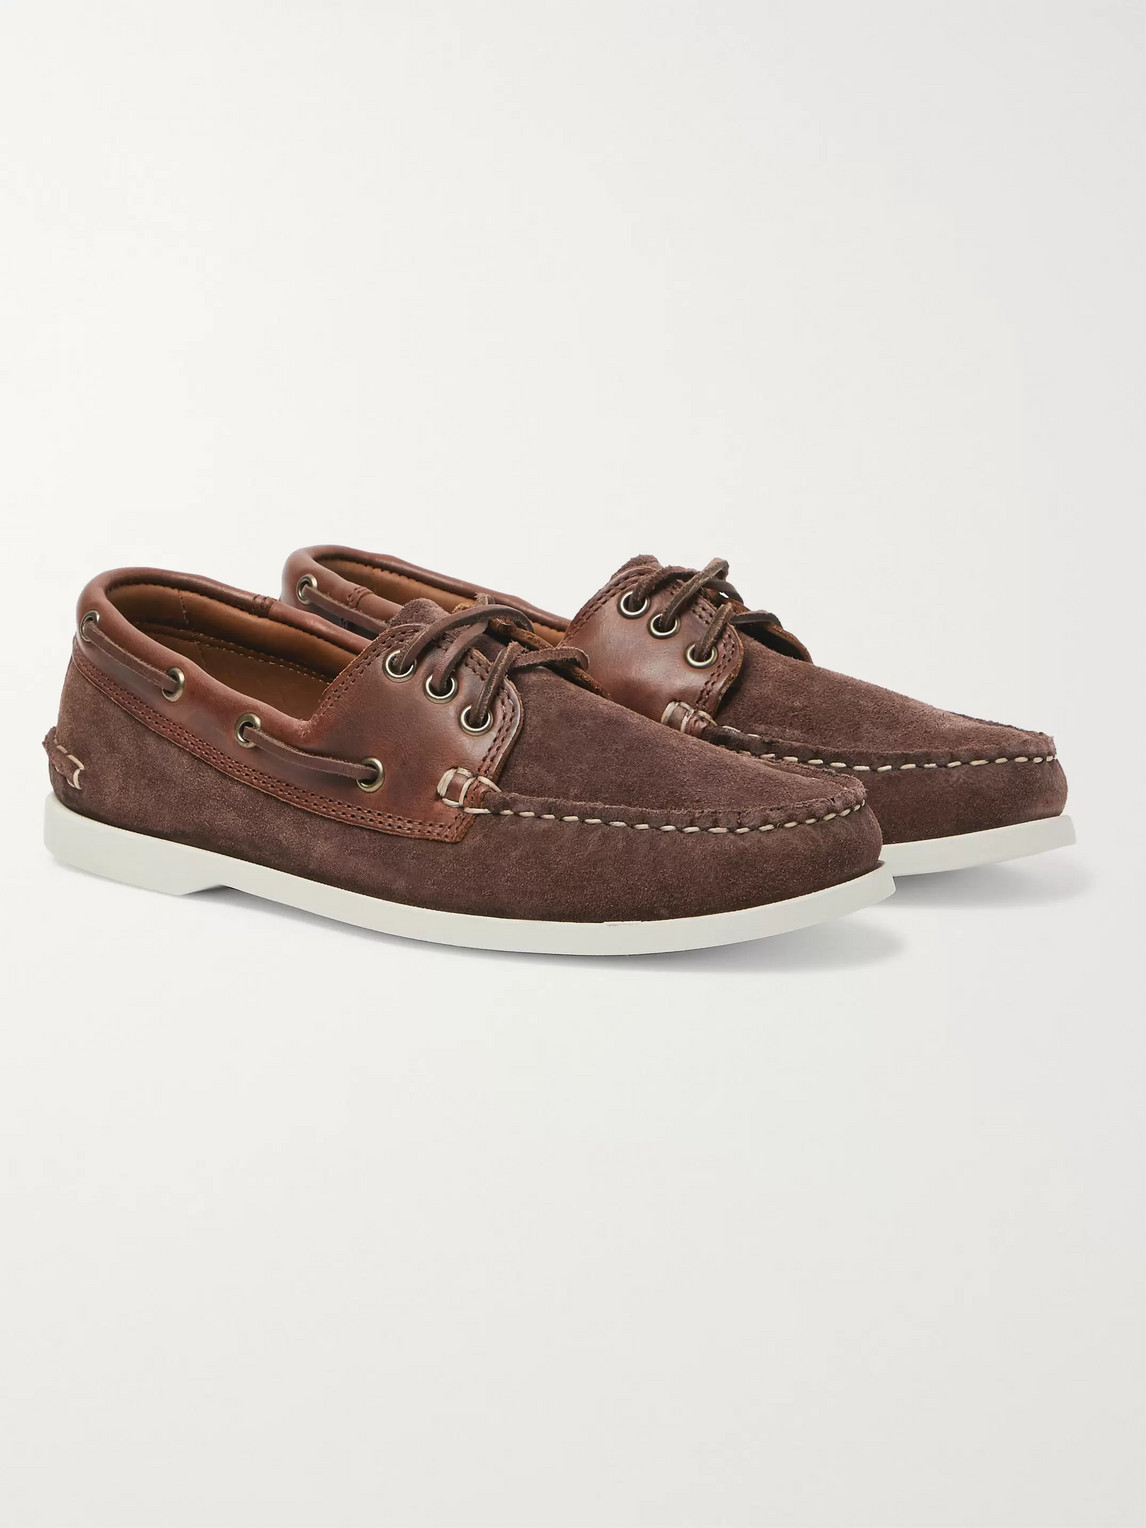 Quoddy Downeast Suede And Leather Boat Shoes In Brown